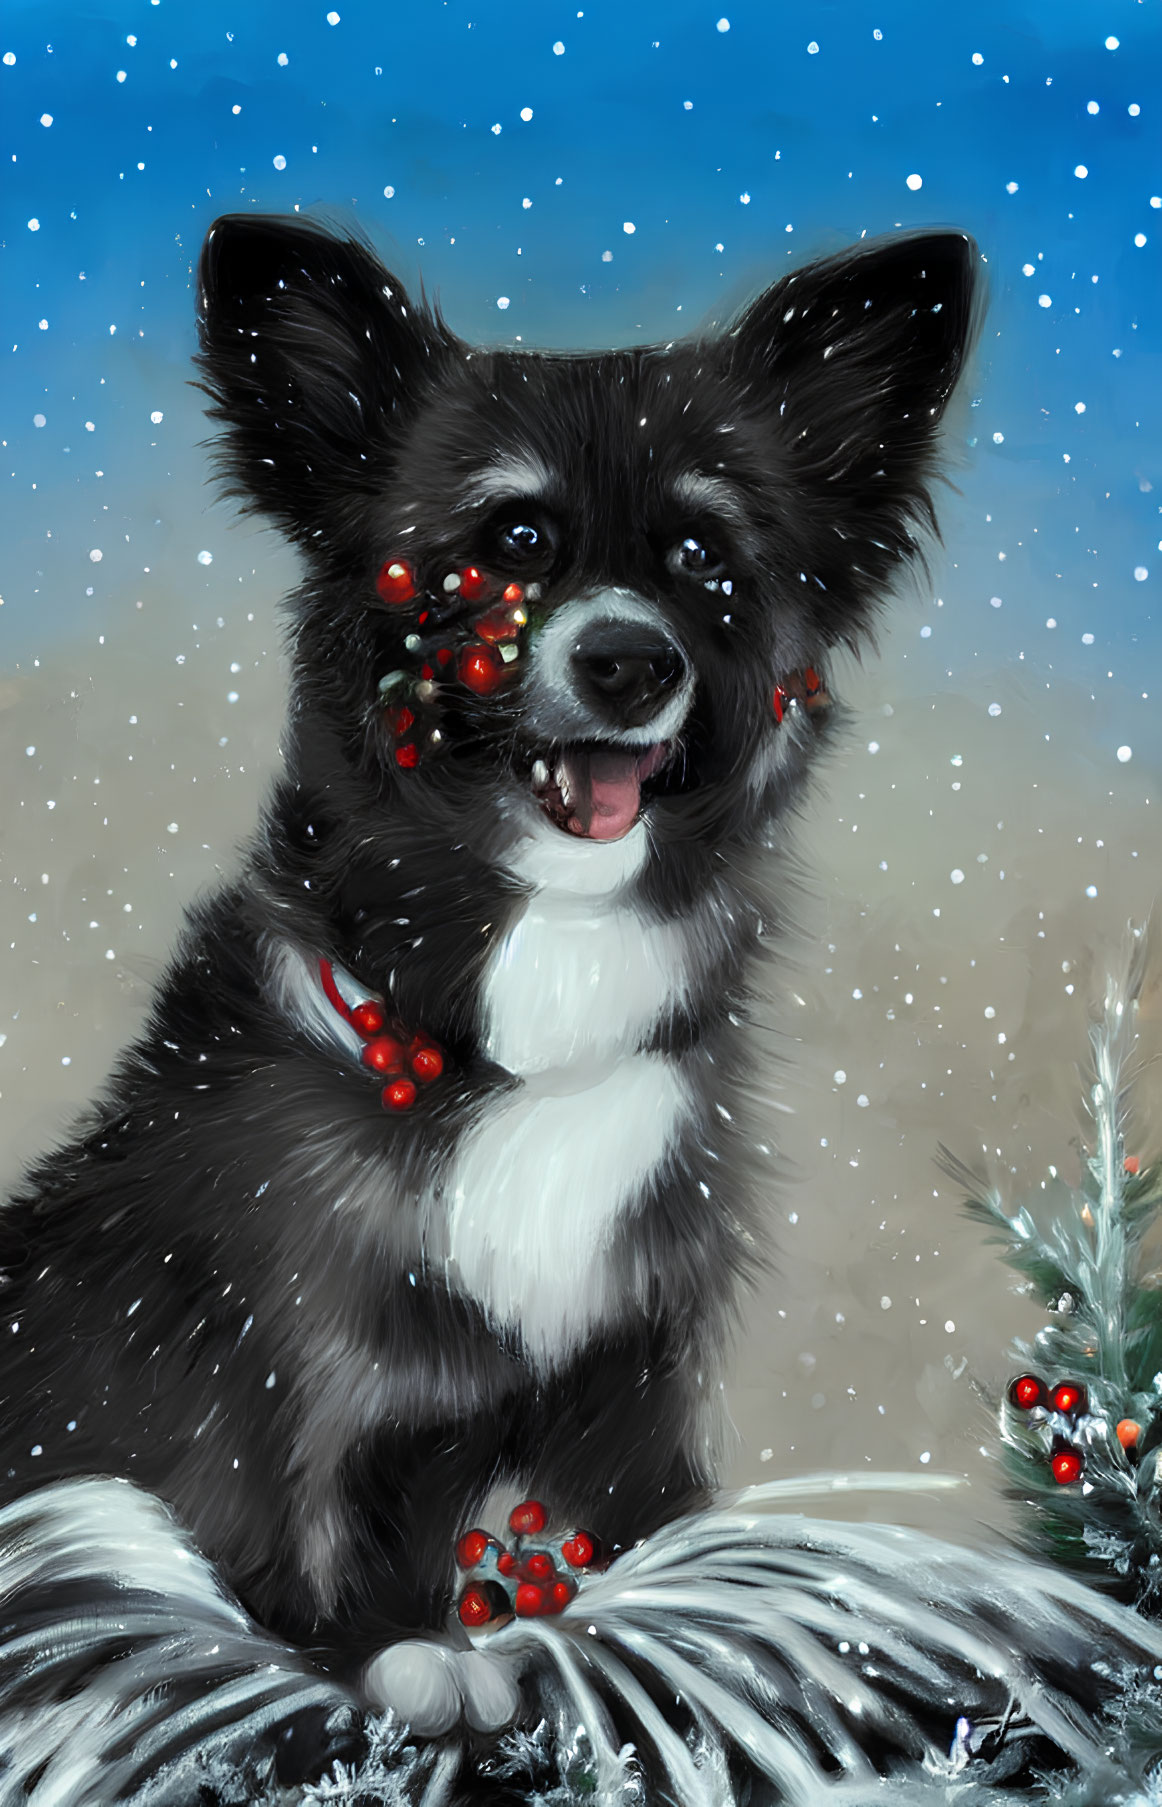 Black and white puppy with holly berries in snowy scene